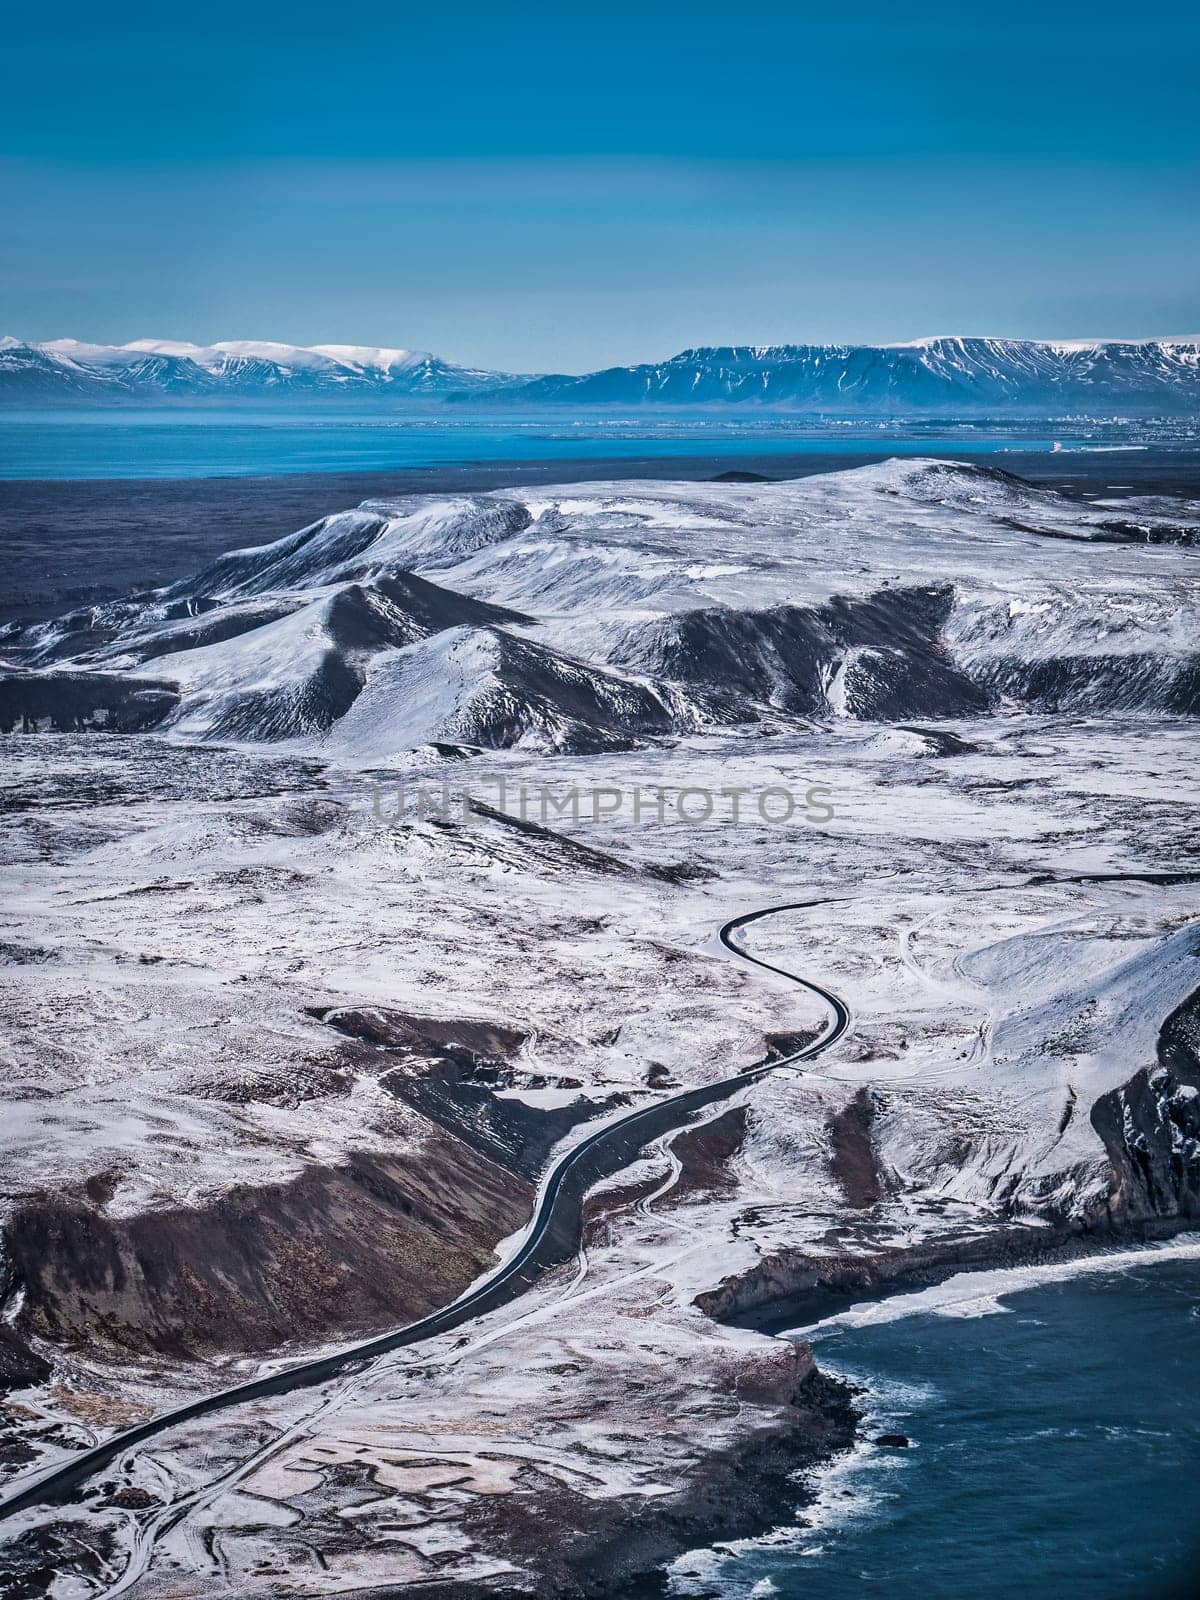 Drone view of majestic scenery with snowy mountains washed by wavy ocean on sunny day